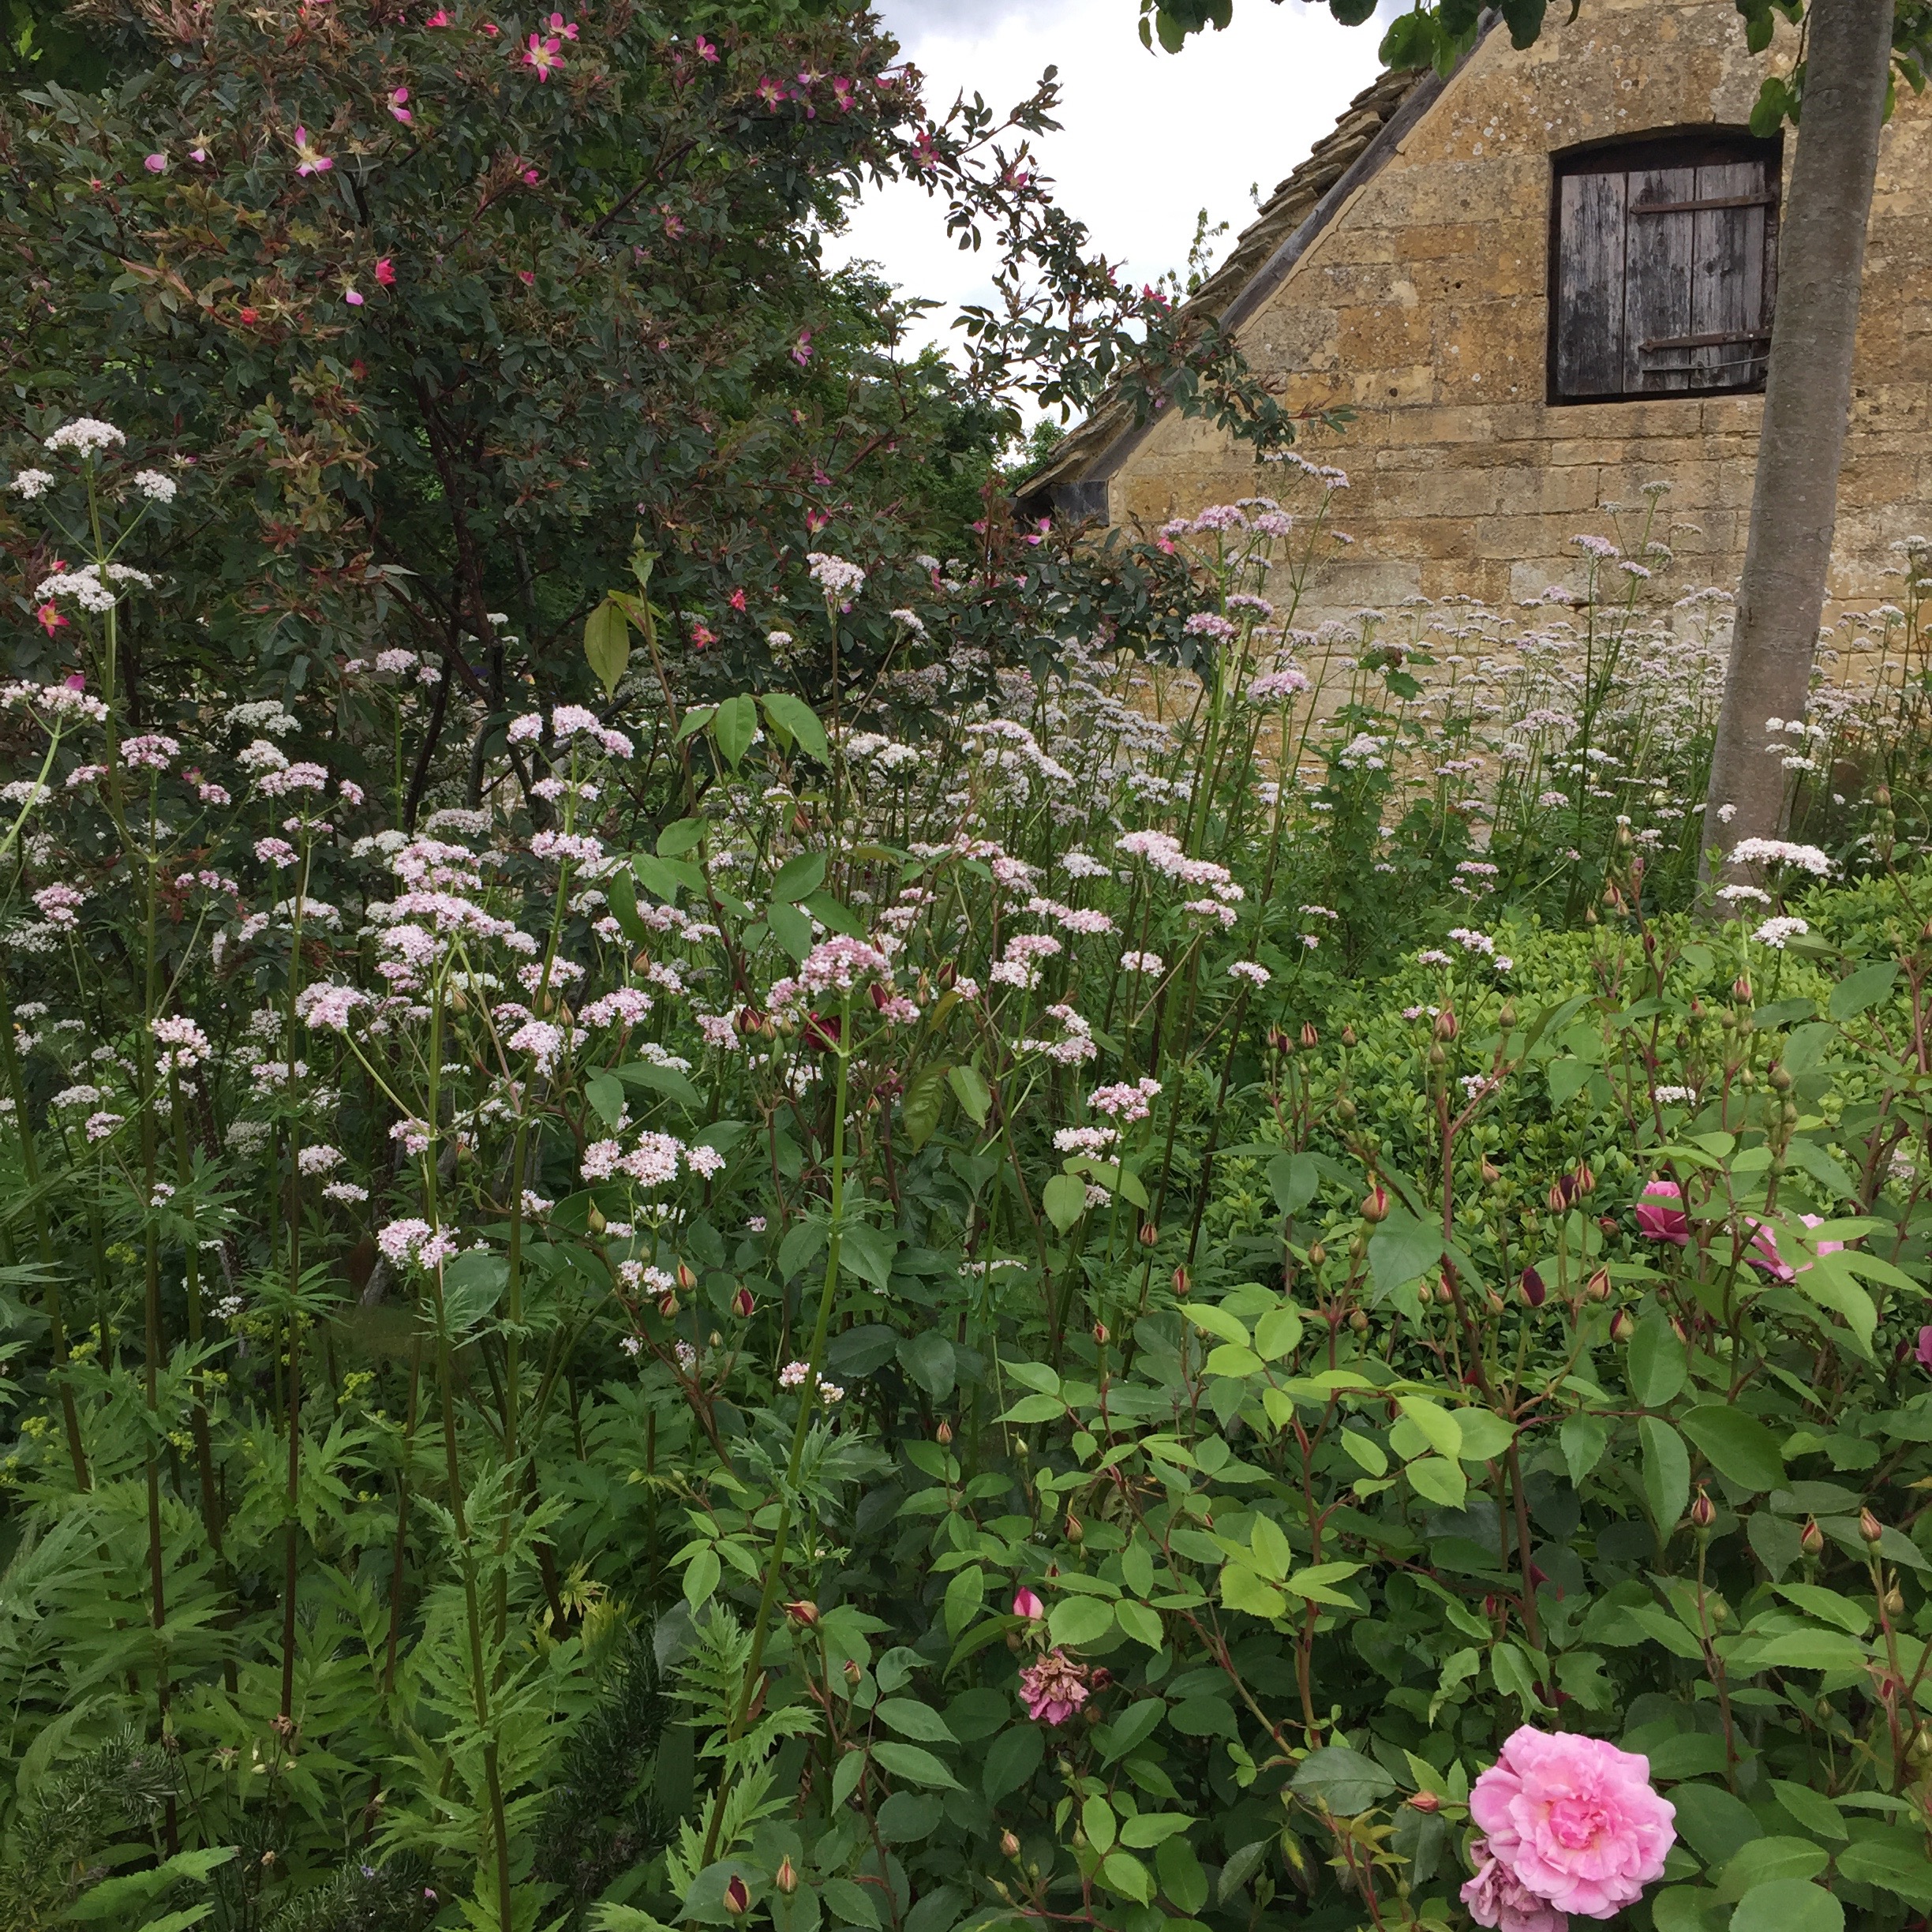 Jinny Blom S Garden At Temple Guiting Manor Annie Bee The Buzz Of A Like Minded Woman